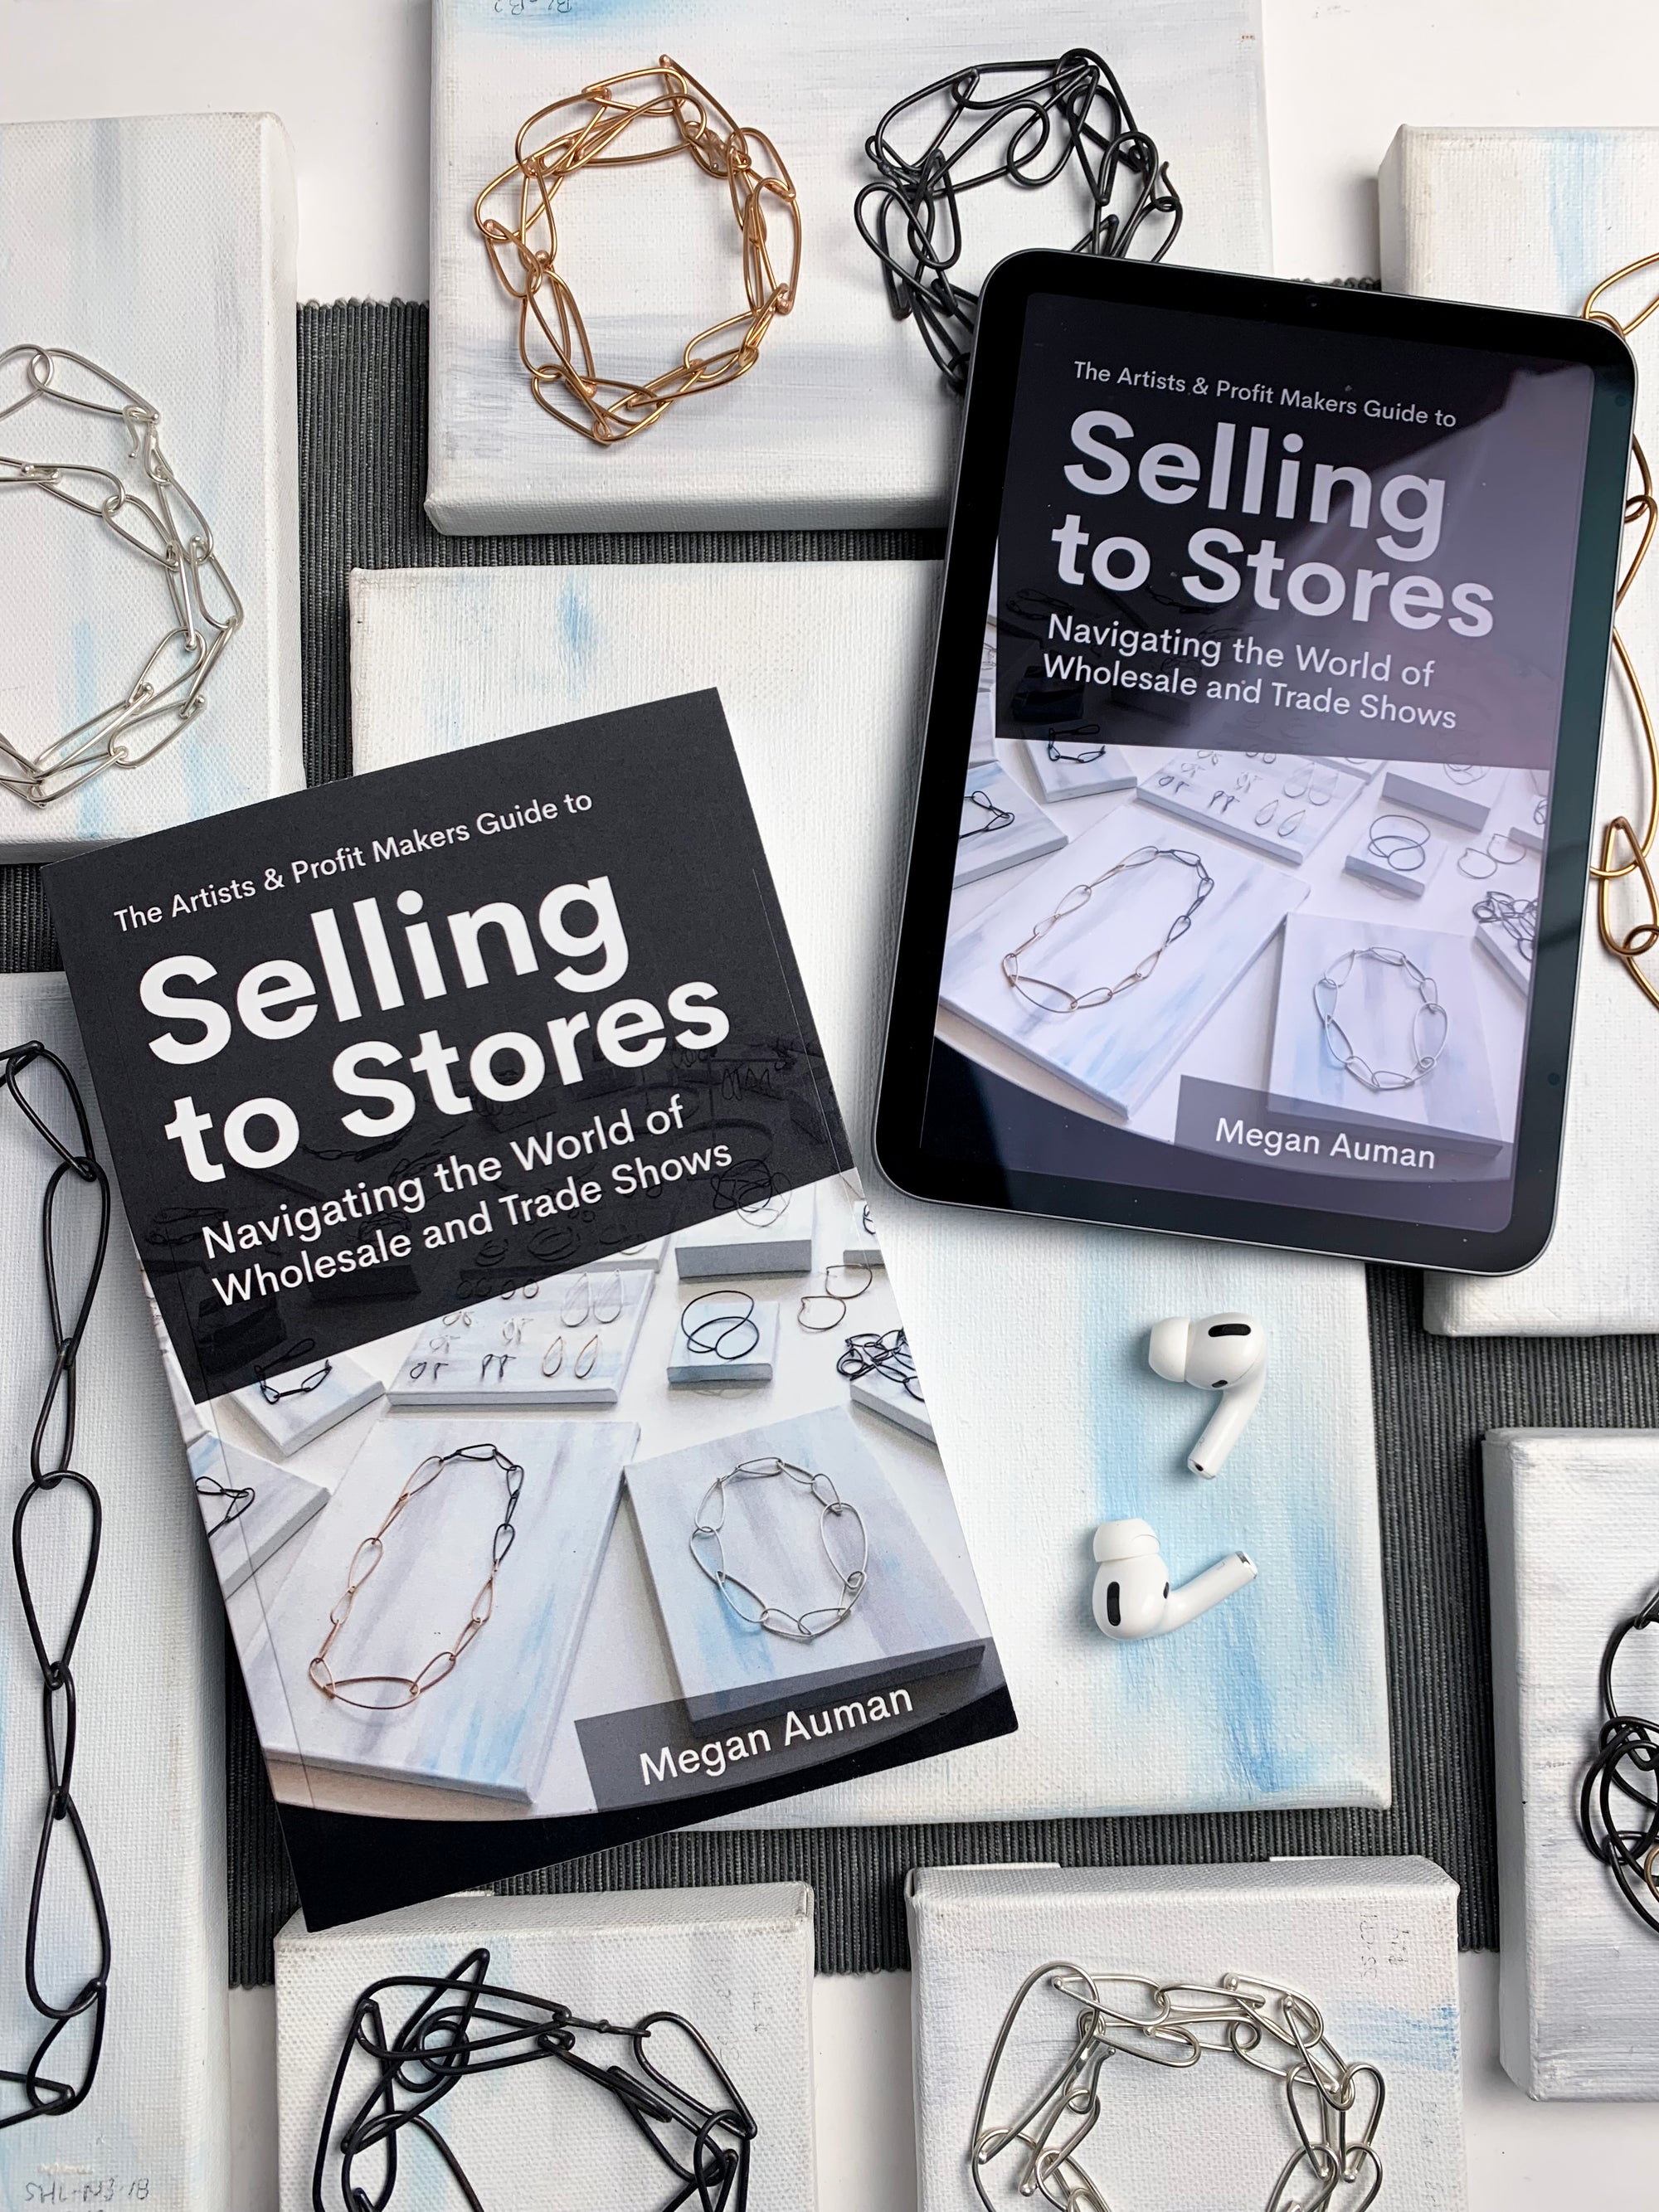 The Artists & Profit Makers Guide to Selling to Stores